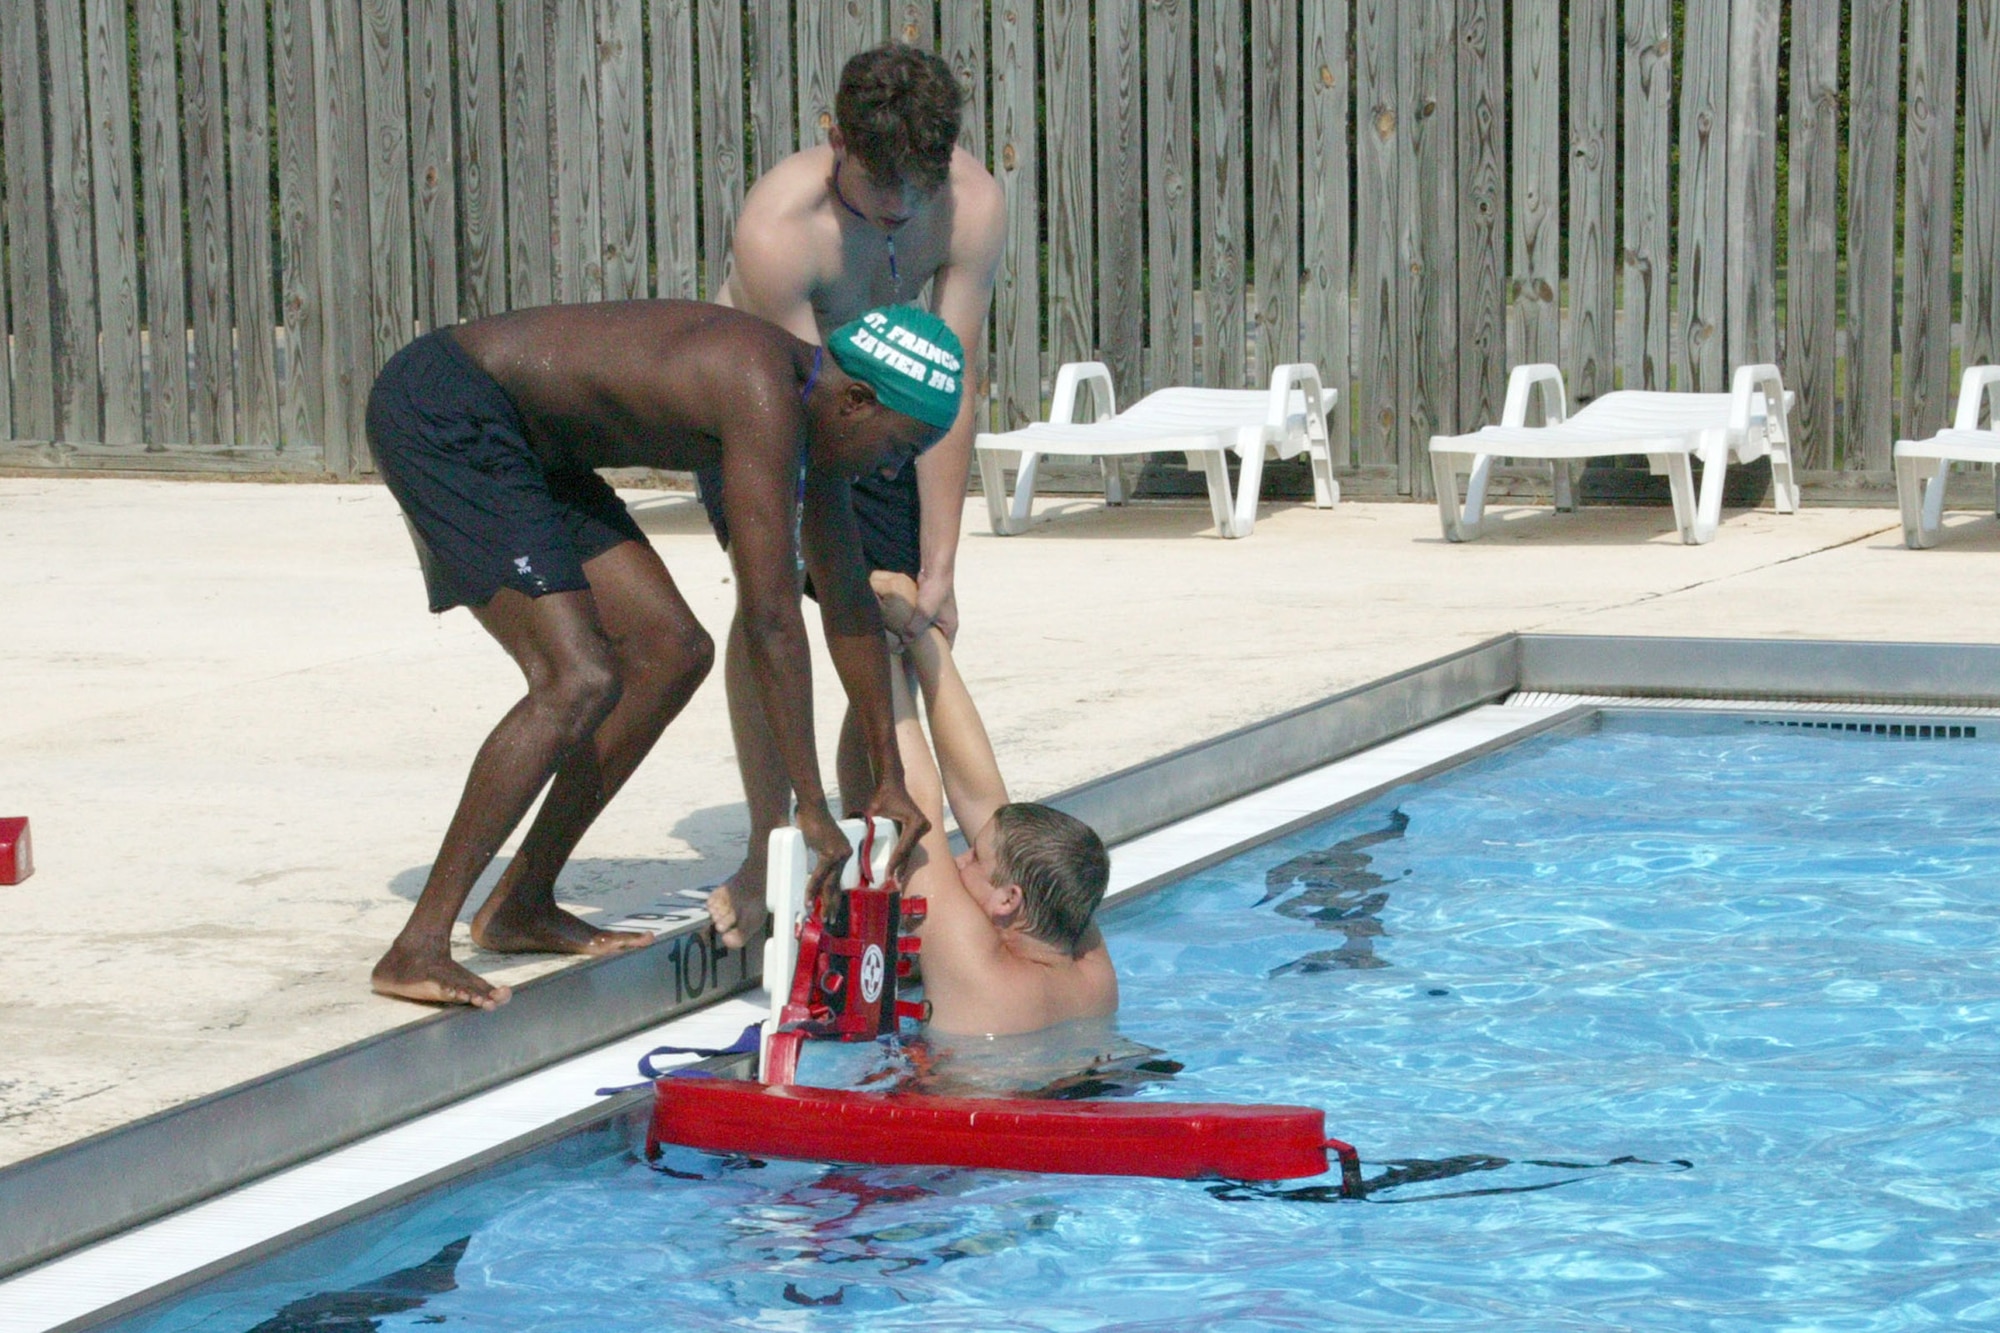 Josh Hallums (left) and Phillip Farmer, both 20th Services Squadron lifeguards, "rescue" fellow lifeguard Cody Wells, a simulated drowning victim, during a recent lifeguard training exercise. (U.S. Air Force photo/Tarsha Storey)